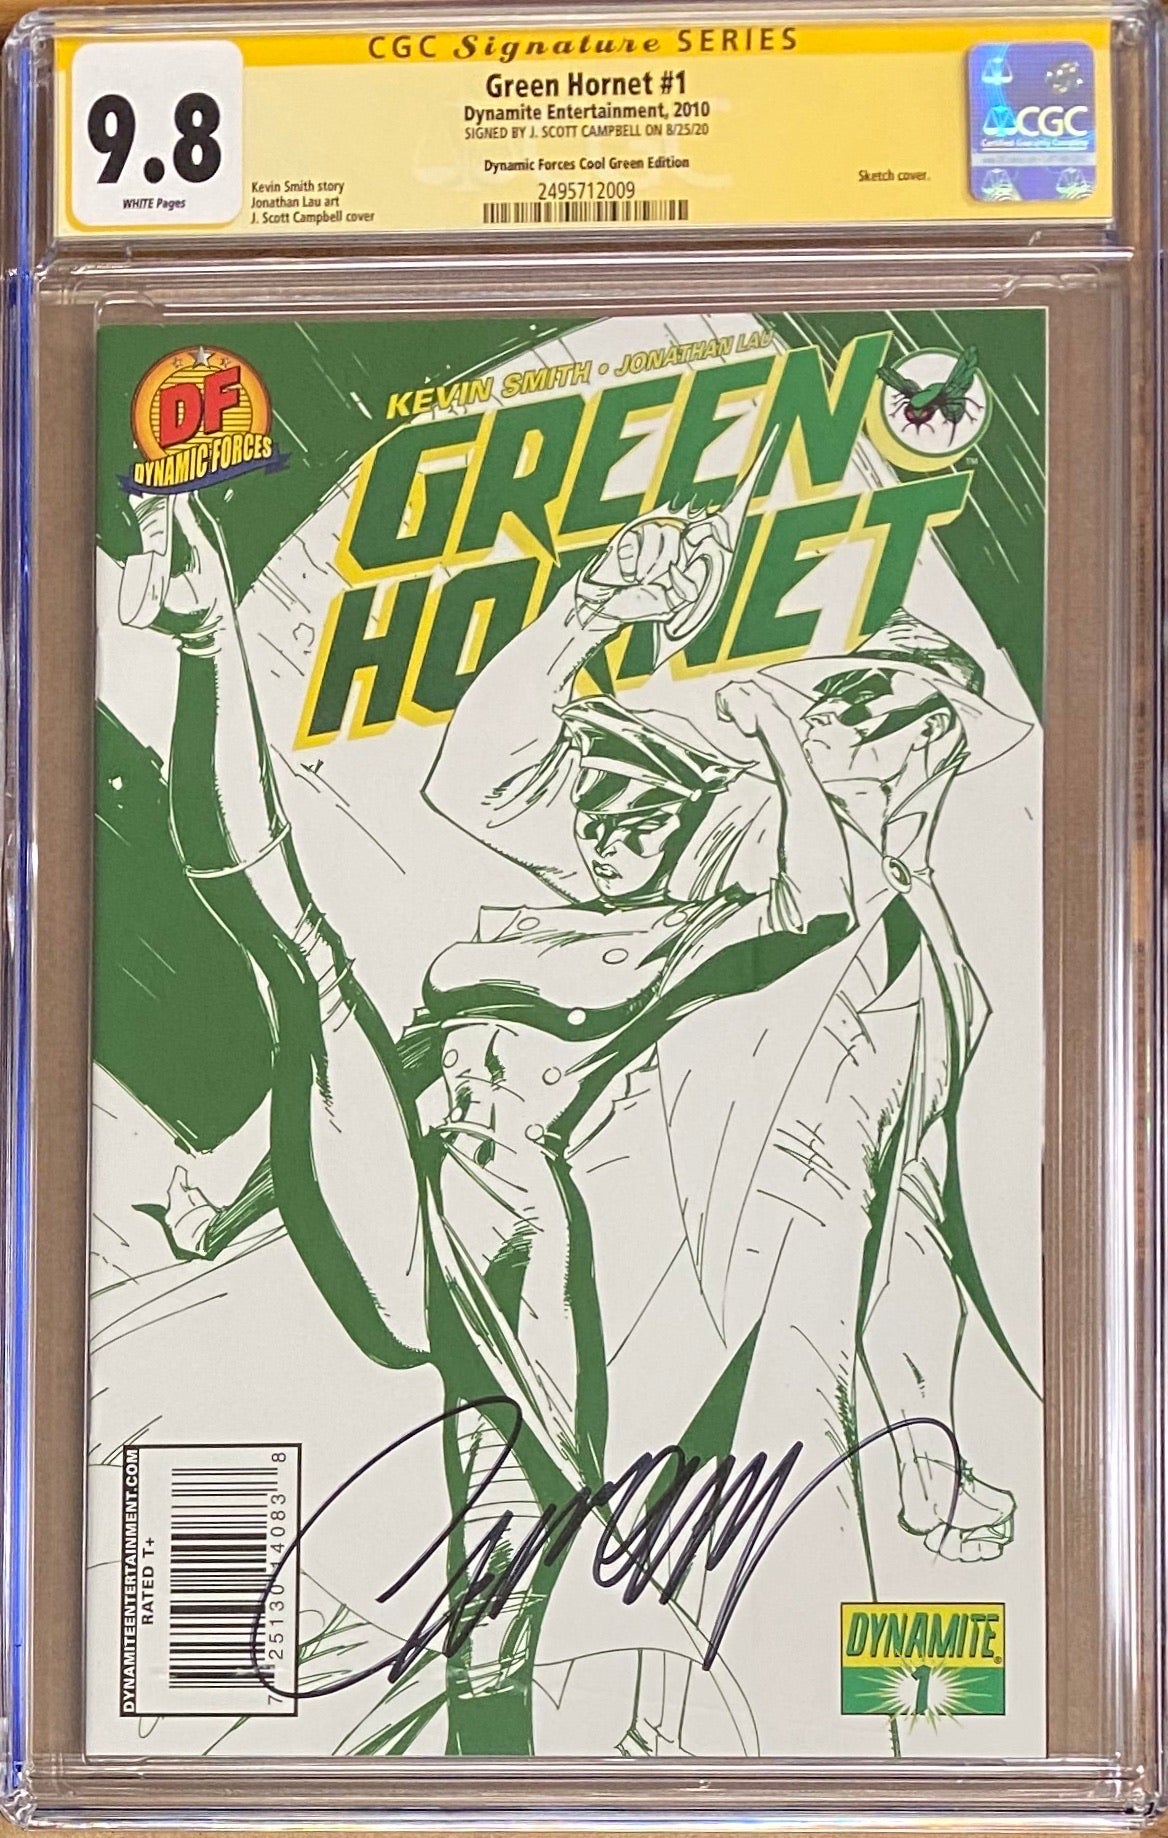 Green Hornet #1 J. Scott Campbell Dynamic Forces Cool Green Edition CGC 9.8 SS